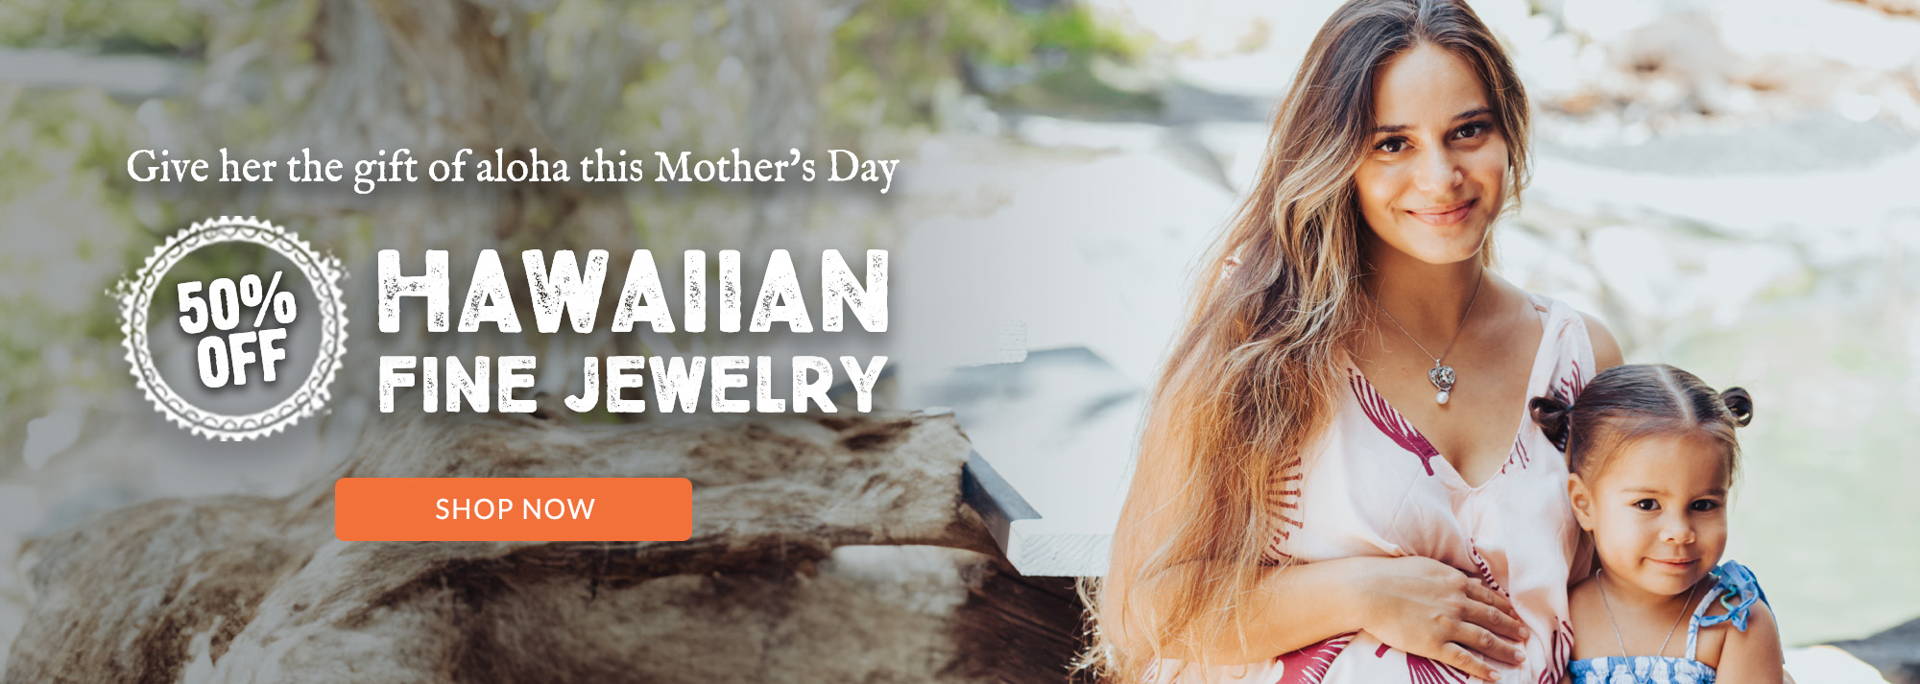 Early Mother's Day Sale: 50% Off Hawaiian Fine Jewelry. Shop Early Mother's Day Sale! Treat Mom to exquisite Hawaiian fine jewelry at 50% off. Send aloha from the islands and make it unforgettable!